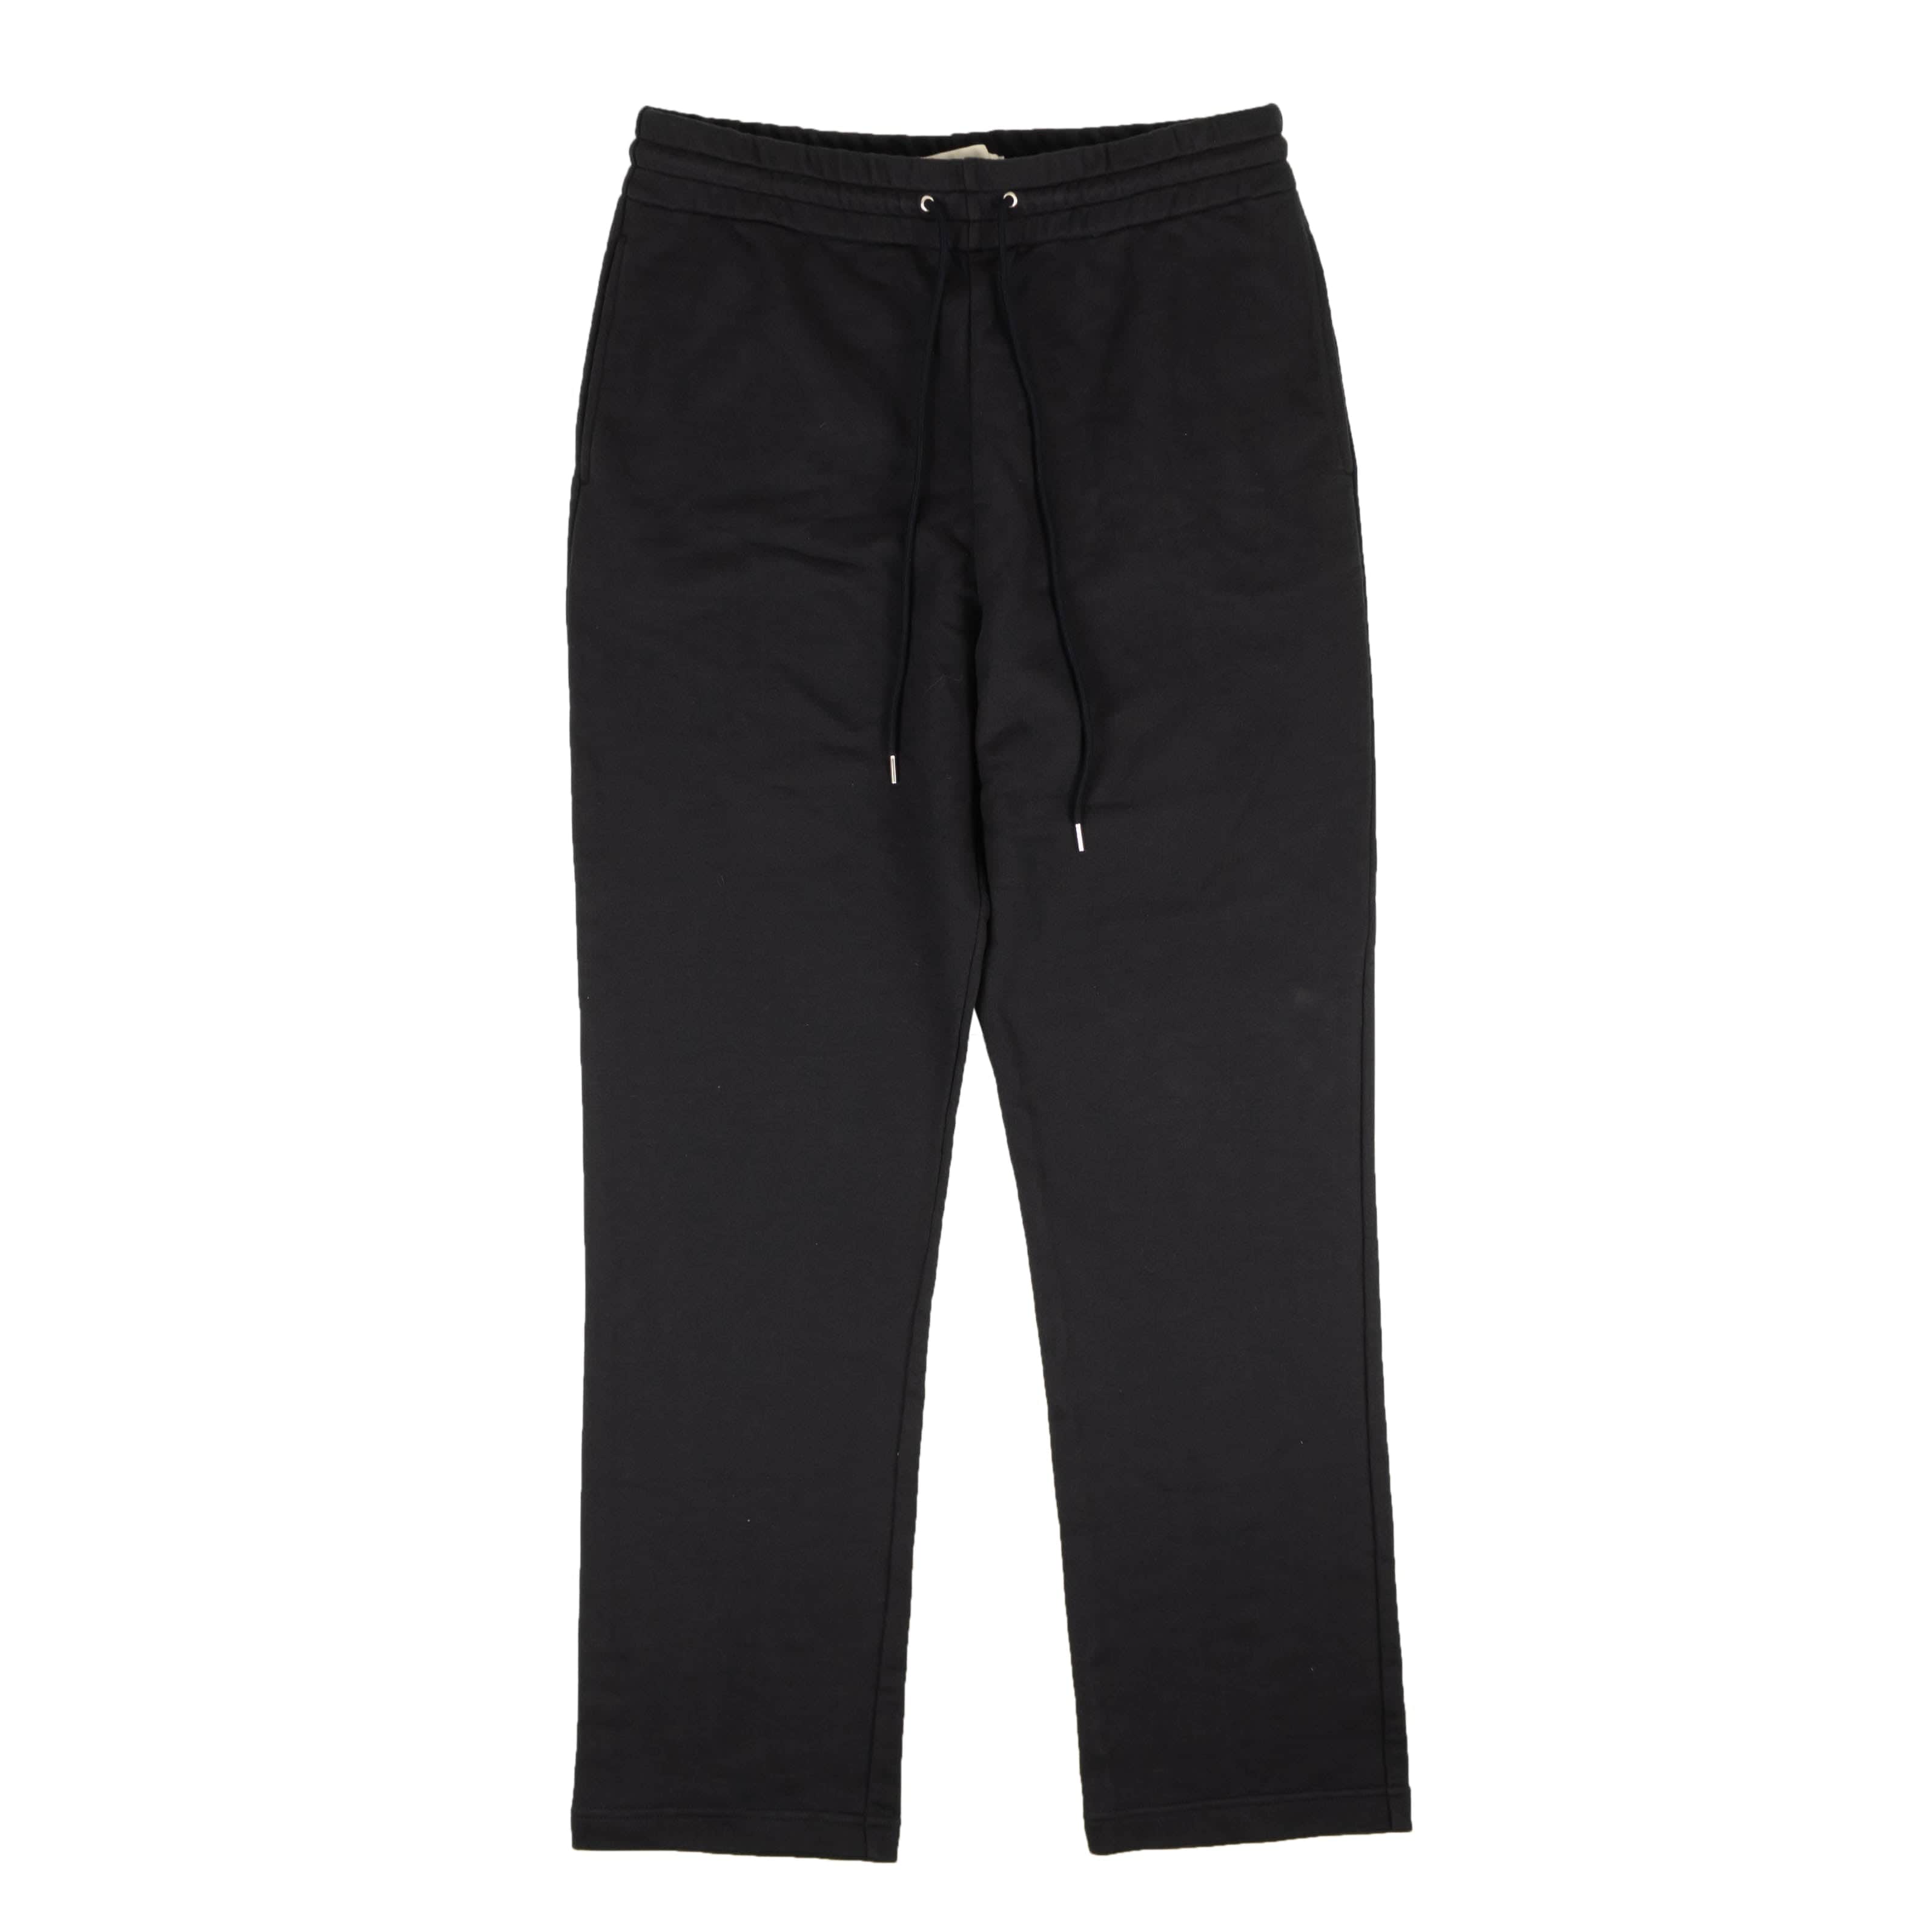 A_Plan_Application a_plan_application, channelenable-all, chicmi, couponcollection, gender-womens, main-clothing, size-xl, under-250, womens-joggers-sweatpants L Navy Blue Classic Jogger Sweatpants 95-APA-1007/L 95-APA-1007/L